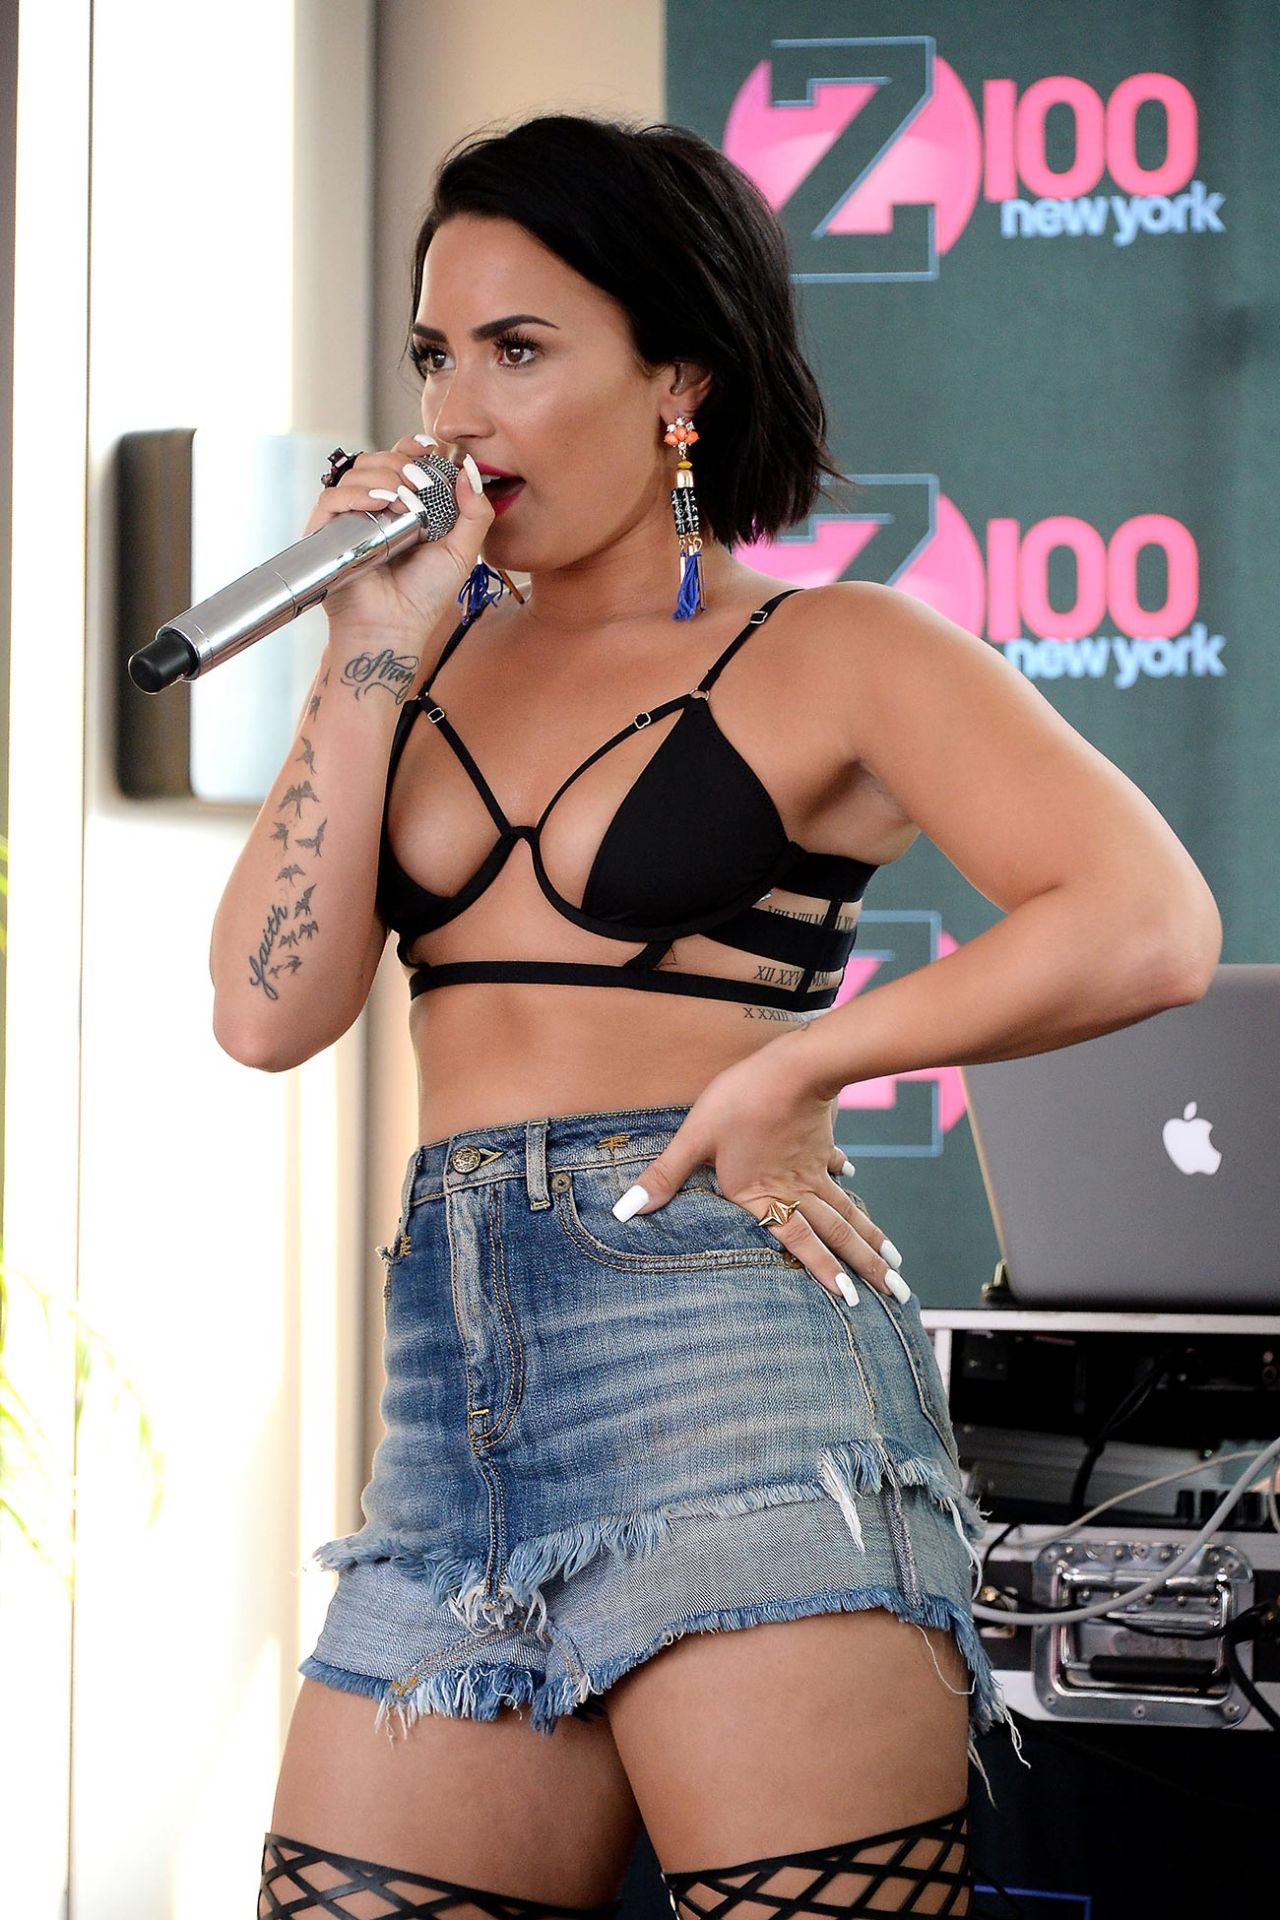 Demi Lovato is Hot - Cool for the Summer Pool Party Tour in New York.